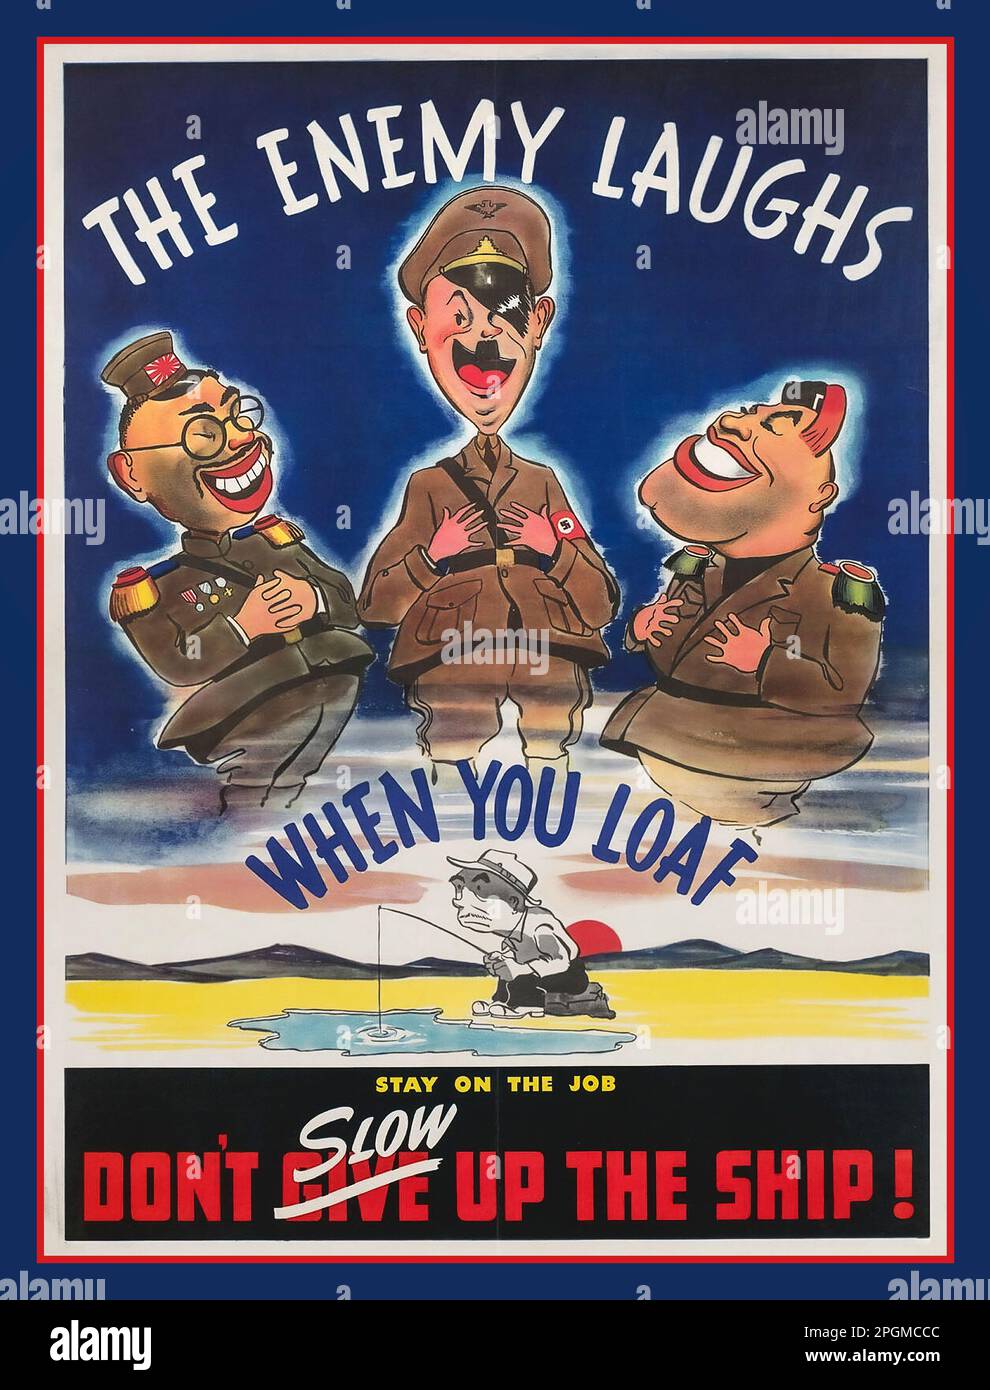 1943 WW2 USA Propaganda Work Output Poster illustrating the Axis of Alliance with cartoon caricatures of Emperor Hirohito Imperial Japan, Adolf Hitler Leader Nazi Party and Benito Mussolini Facist Party. ' The Enemy Laughs When You Loaf, Stay On The Job, Dont Slow Up The Ship ' World War II Second World War WW2 Stock Photo